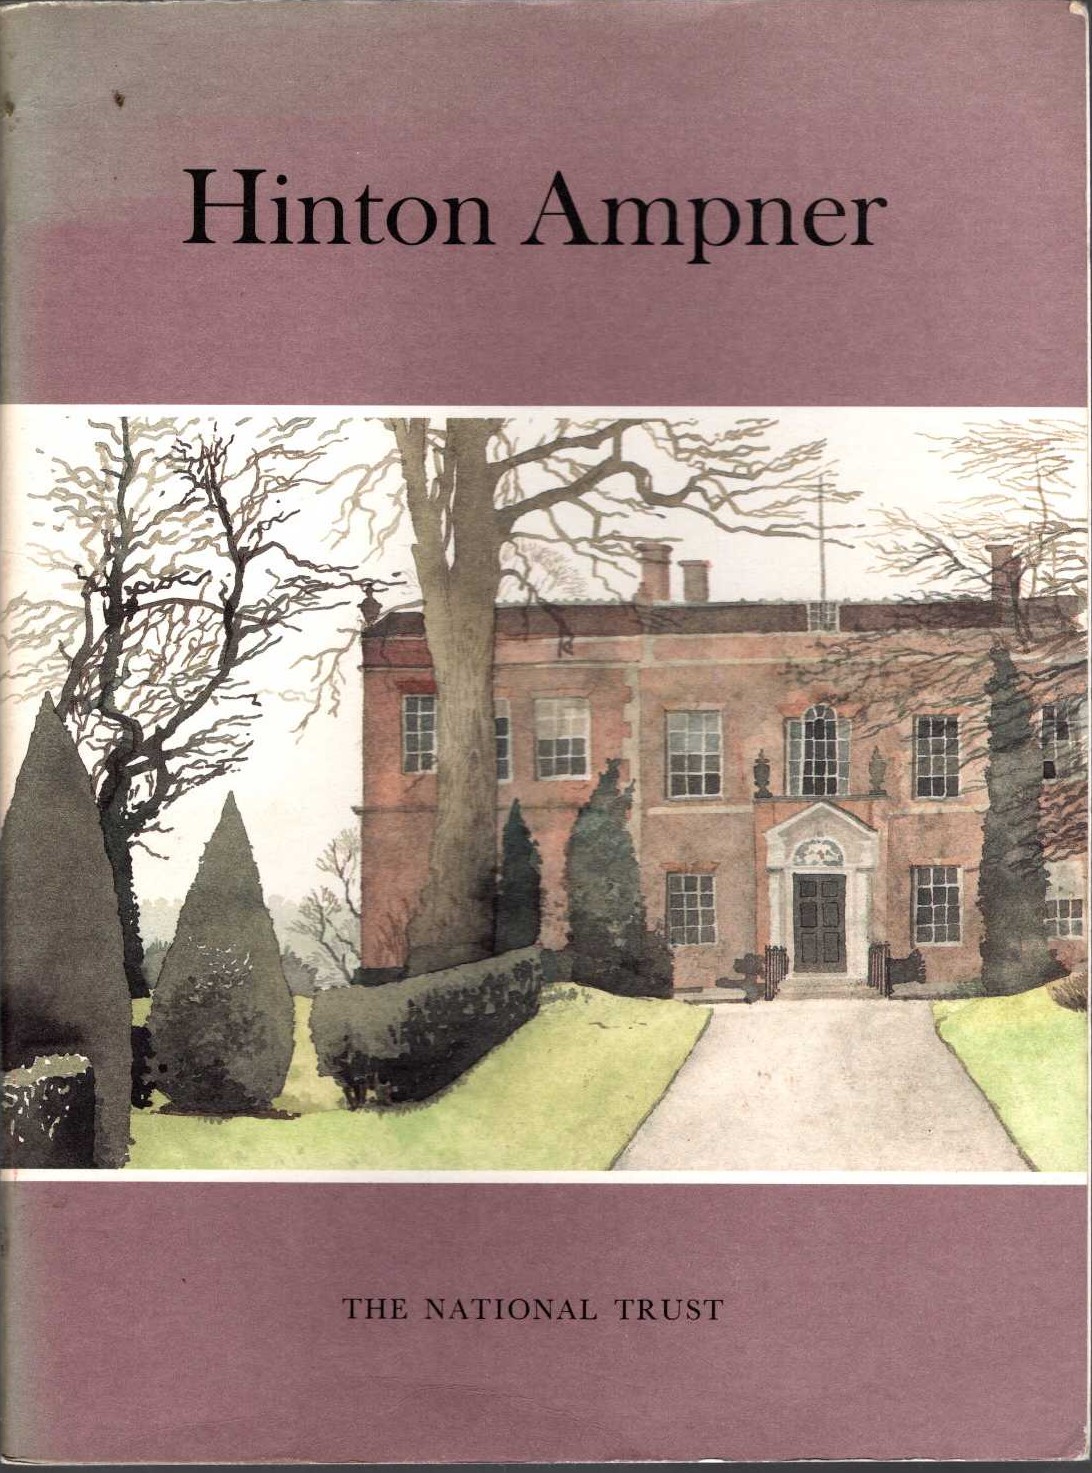 \ HINTON AMPNER by The National Trust front book cover image